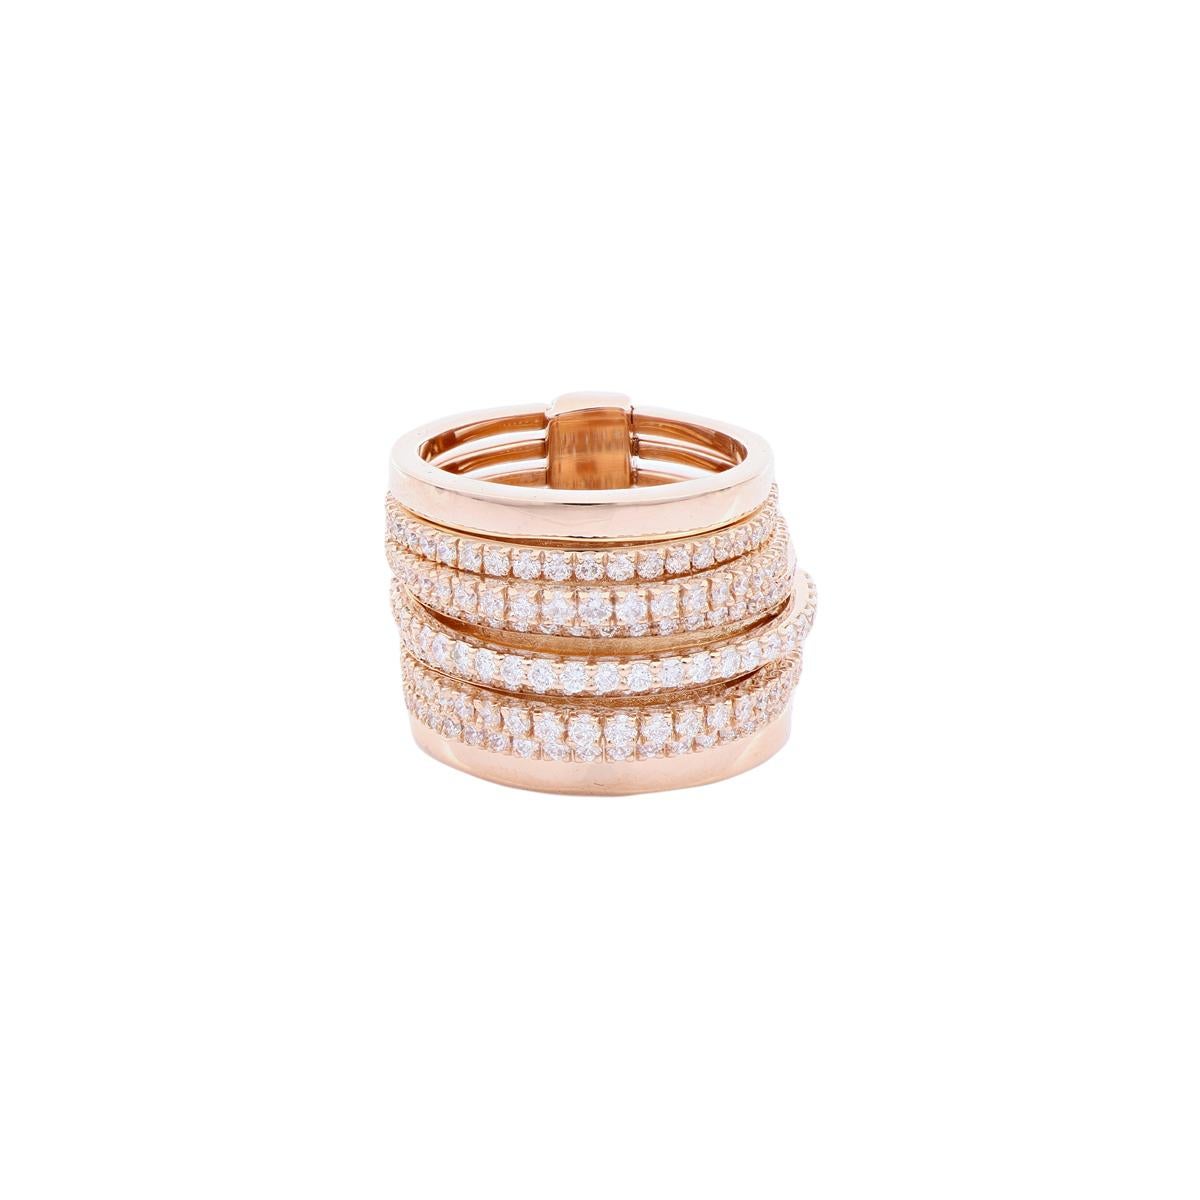 Made up of nonaligned rings, this 18Kt red gold band ring features plain rows on the outside and diamond pavé ones at the center, creating a modern and elegantly balanced look.

This piece of jewelry is highly exclusive, handmade with love by the